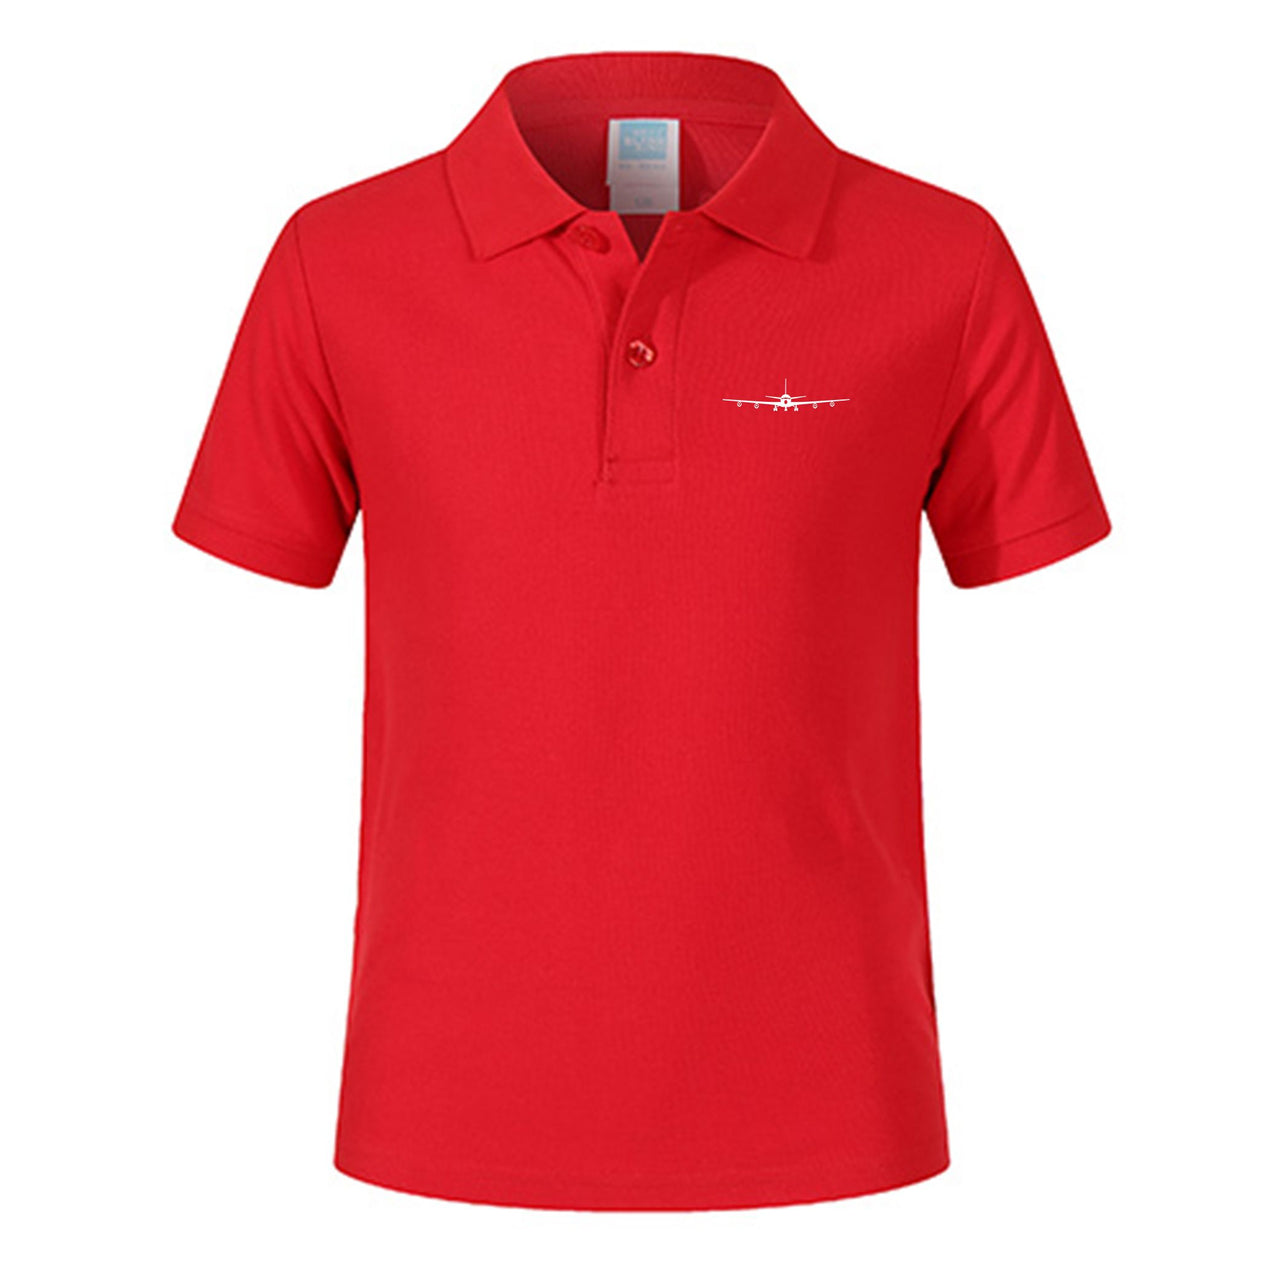 Boeing 707 Silhouette Designed Children Polo T-Shirts